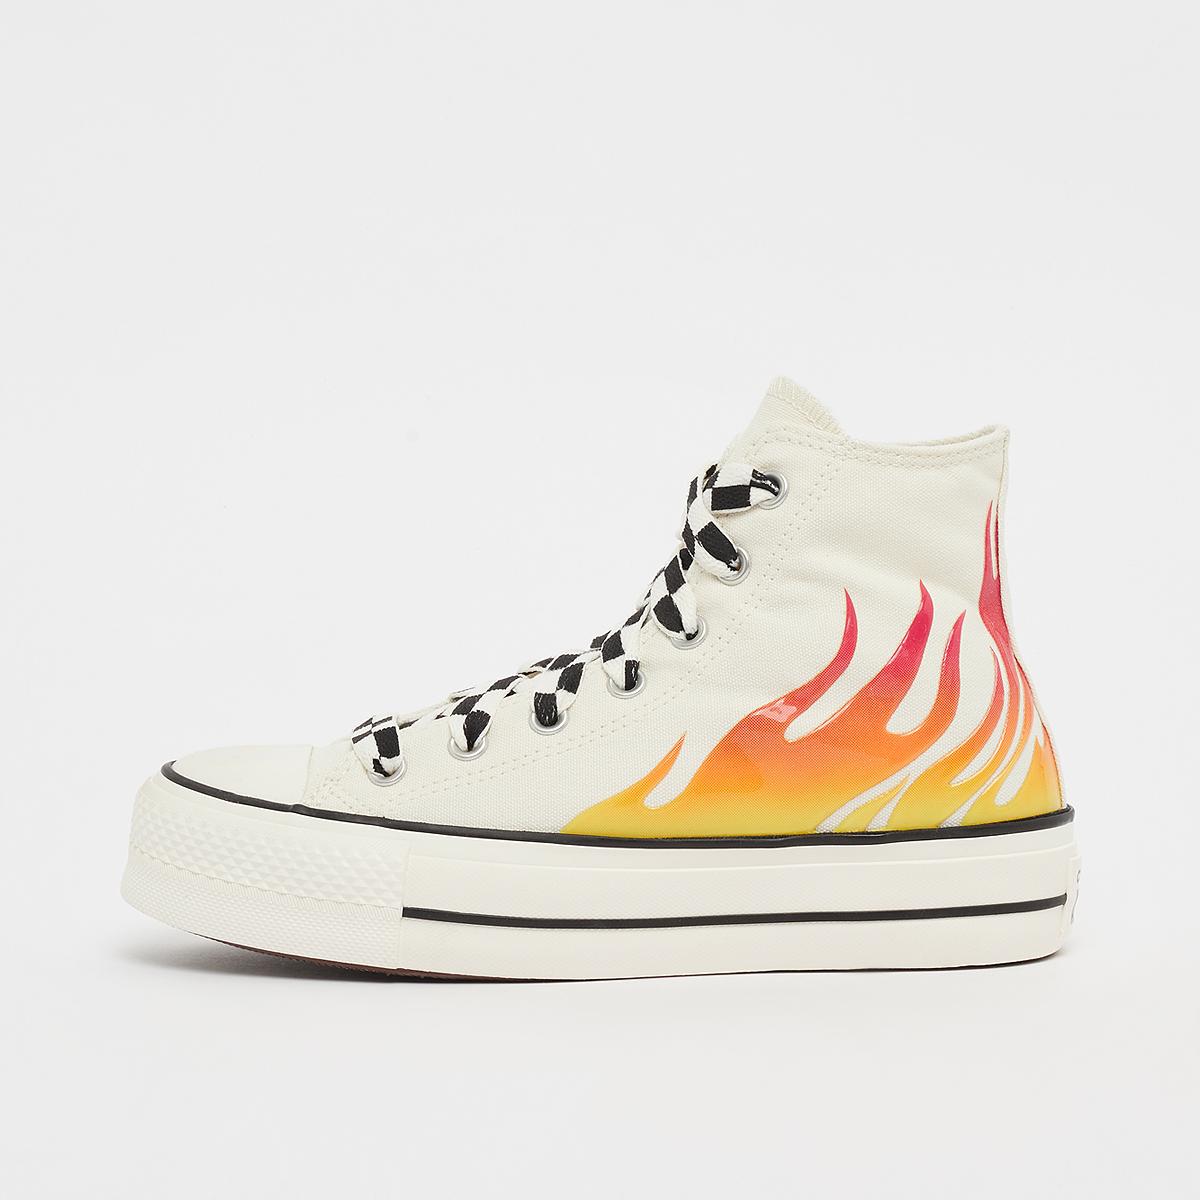 Chuck Taylor All Star, Converse, Footwear, lift egret/enamel red/black, taille: 39